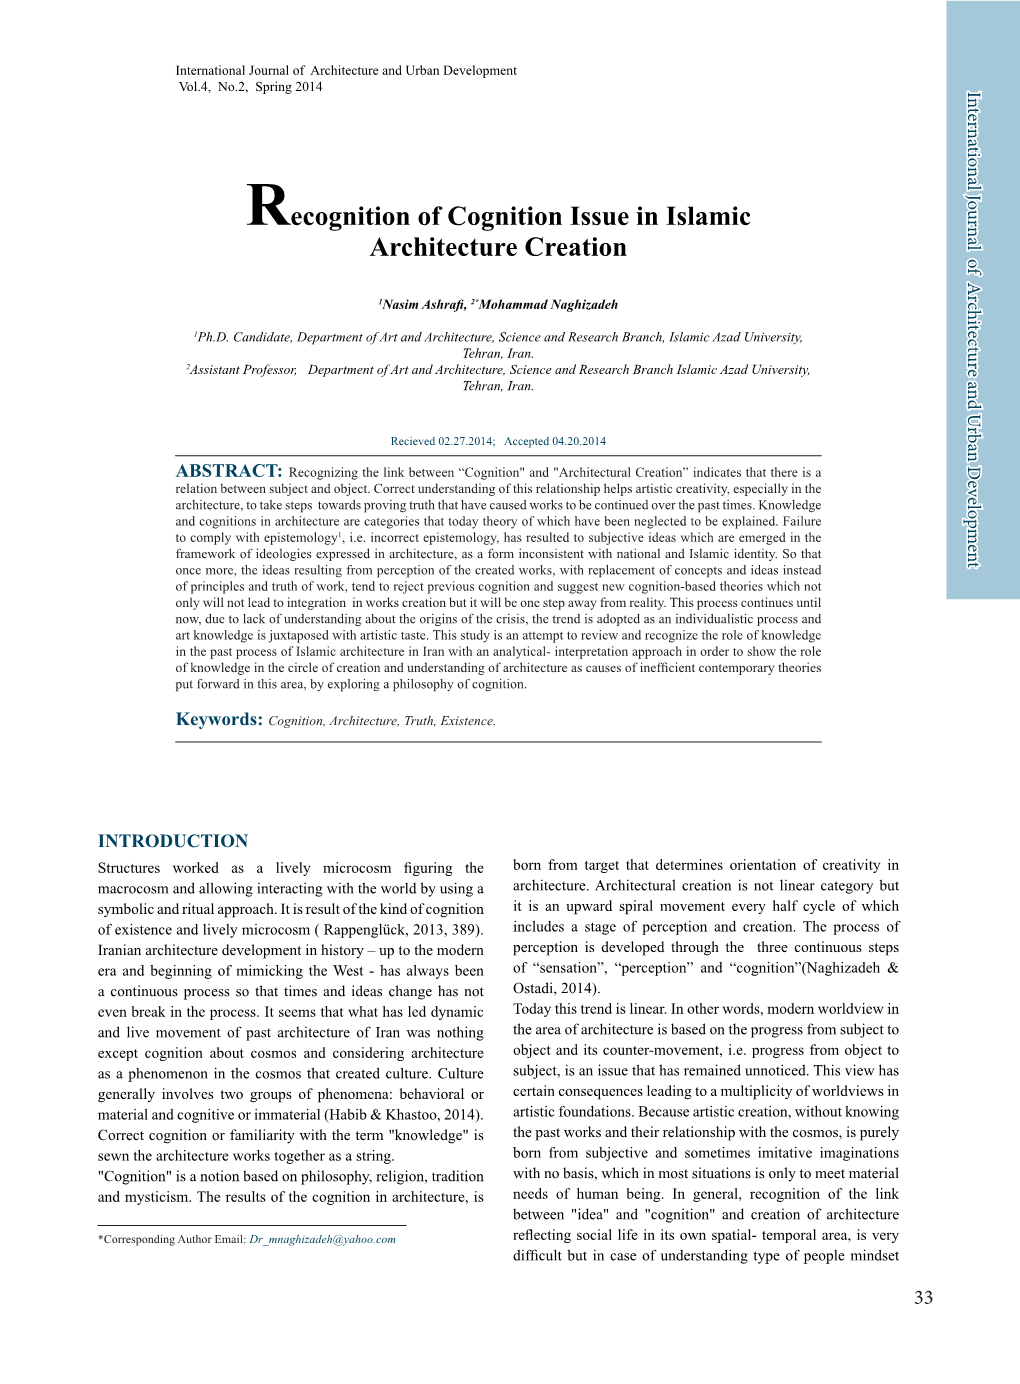 Recognition of Cognition Issue in Islamic Architecture Creation